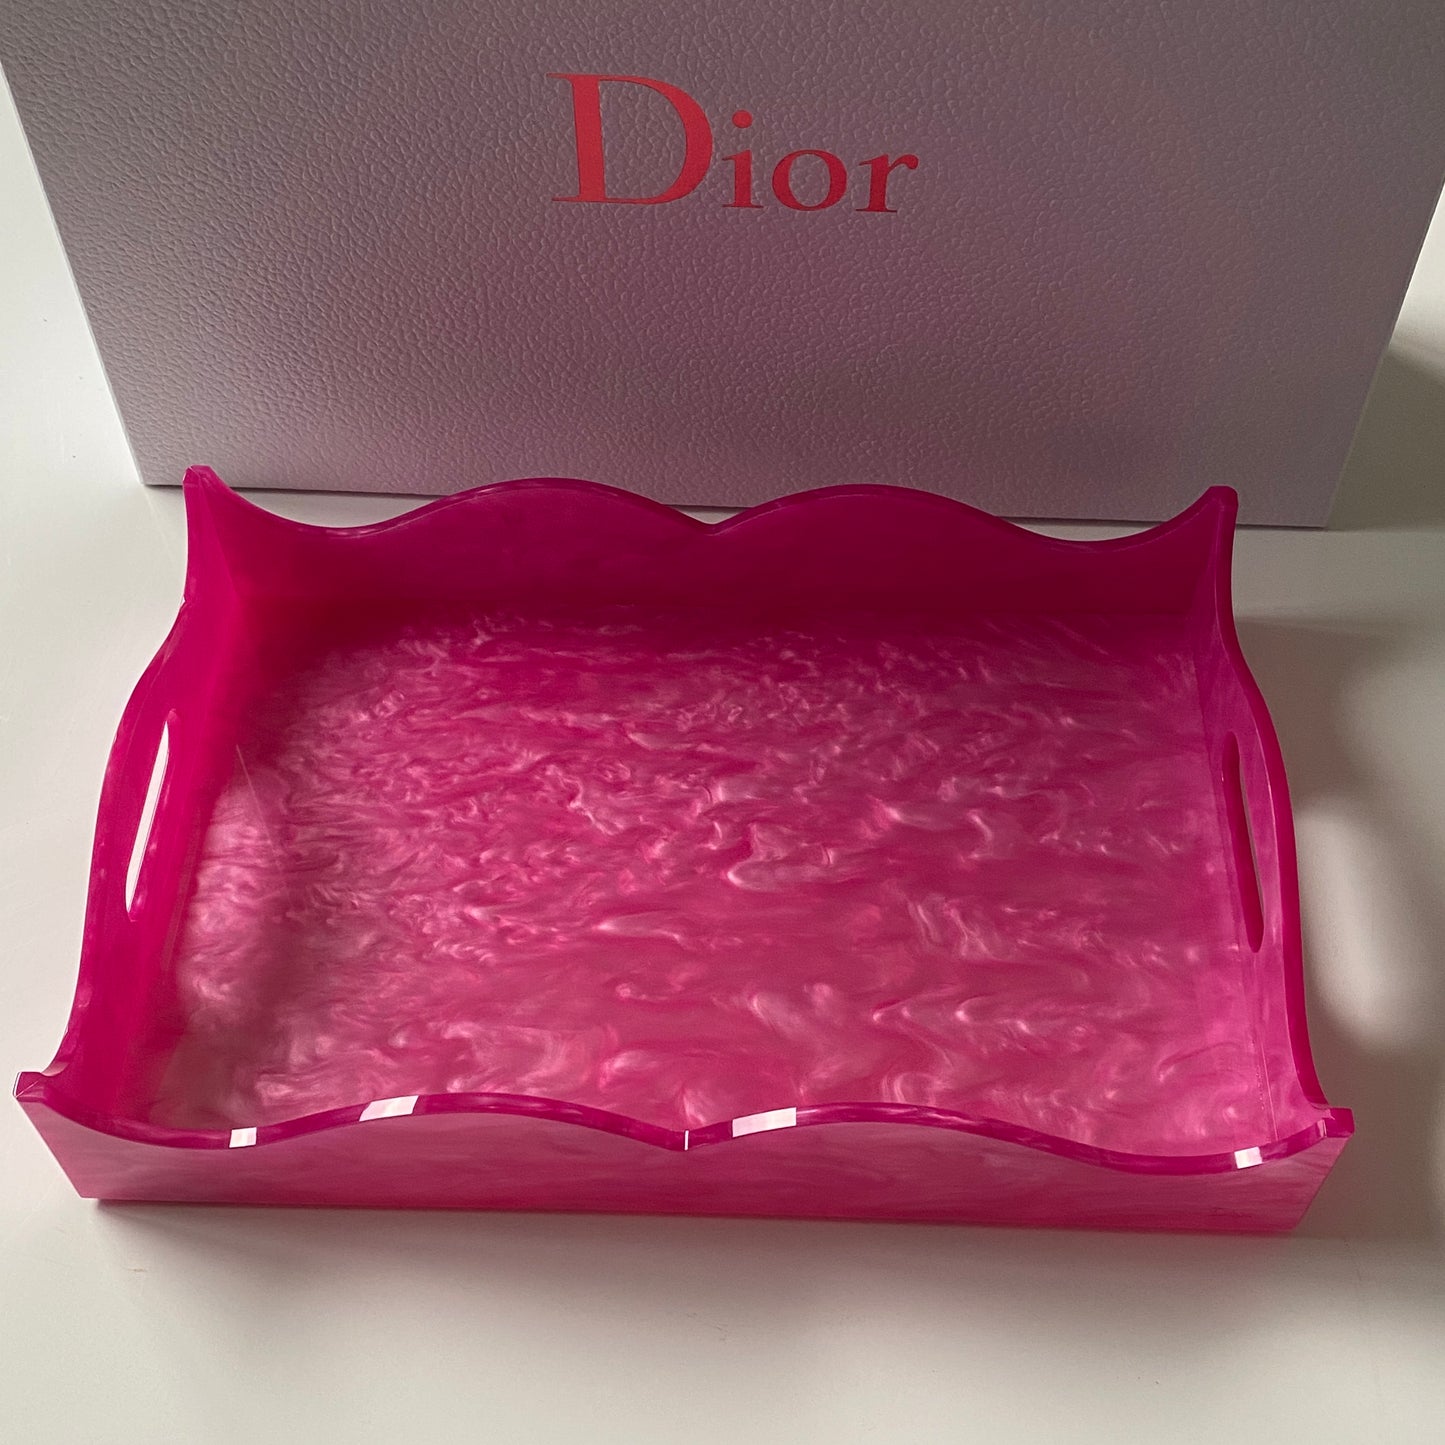 DIOR PINK RESIN TRINKET TRAY - BOXED